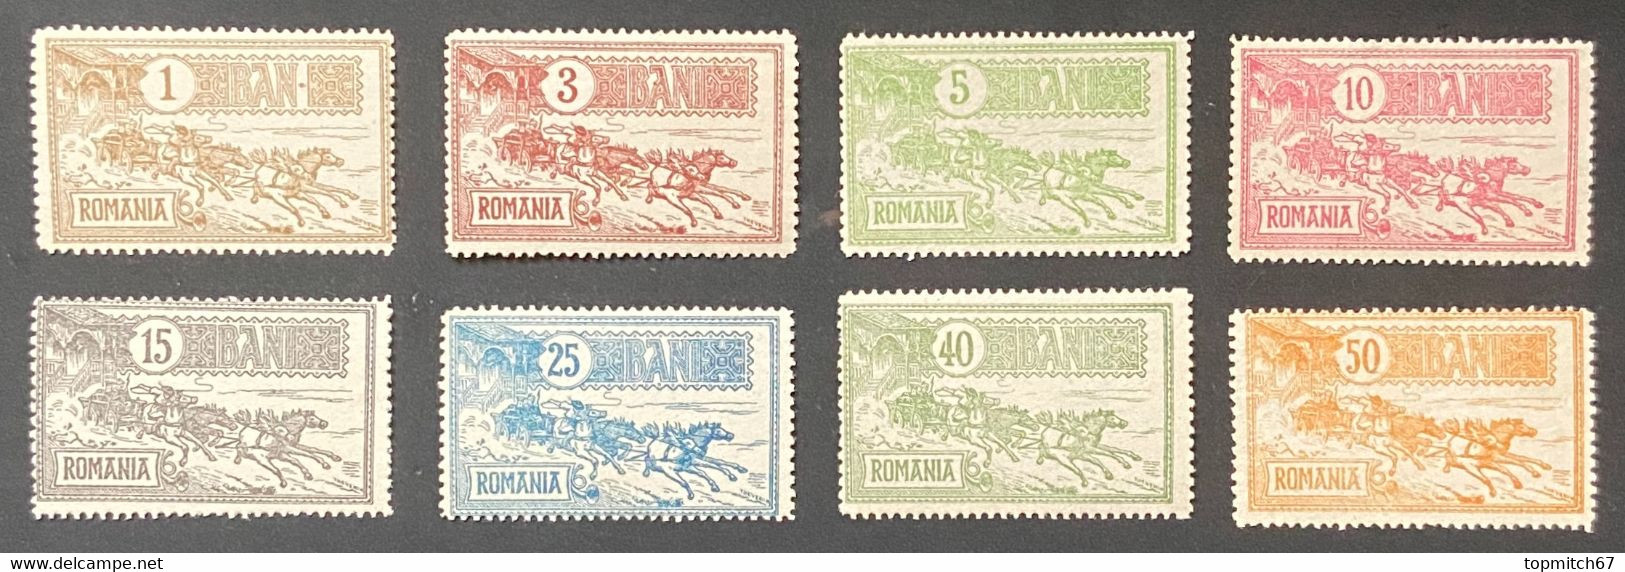 ROM0137-44MNH - Mail Coach - Complete Set Of 8 MNH Stamps - Romania - 1903 - Ongebruikt